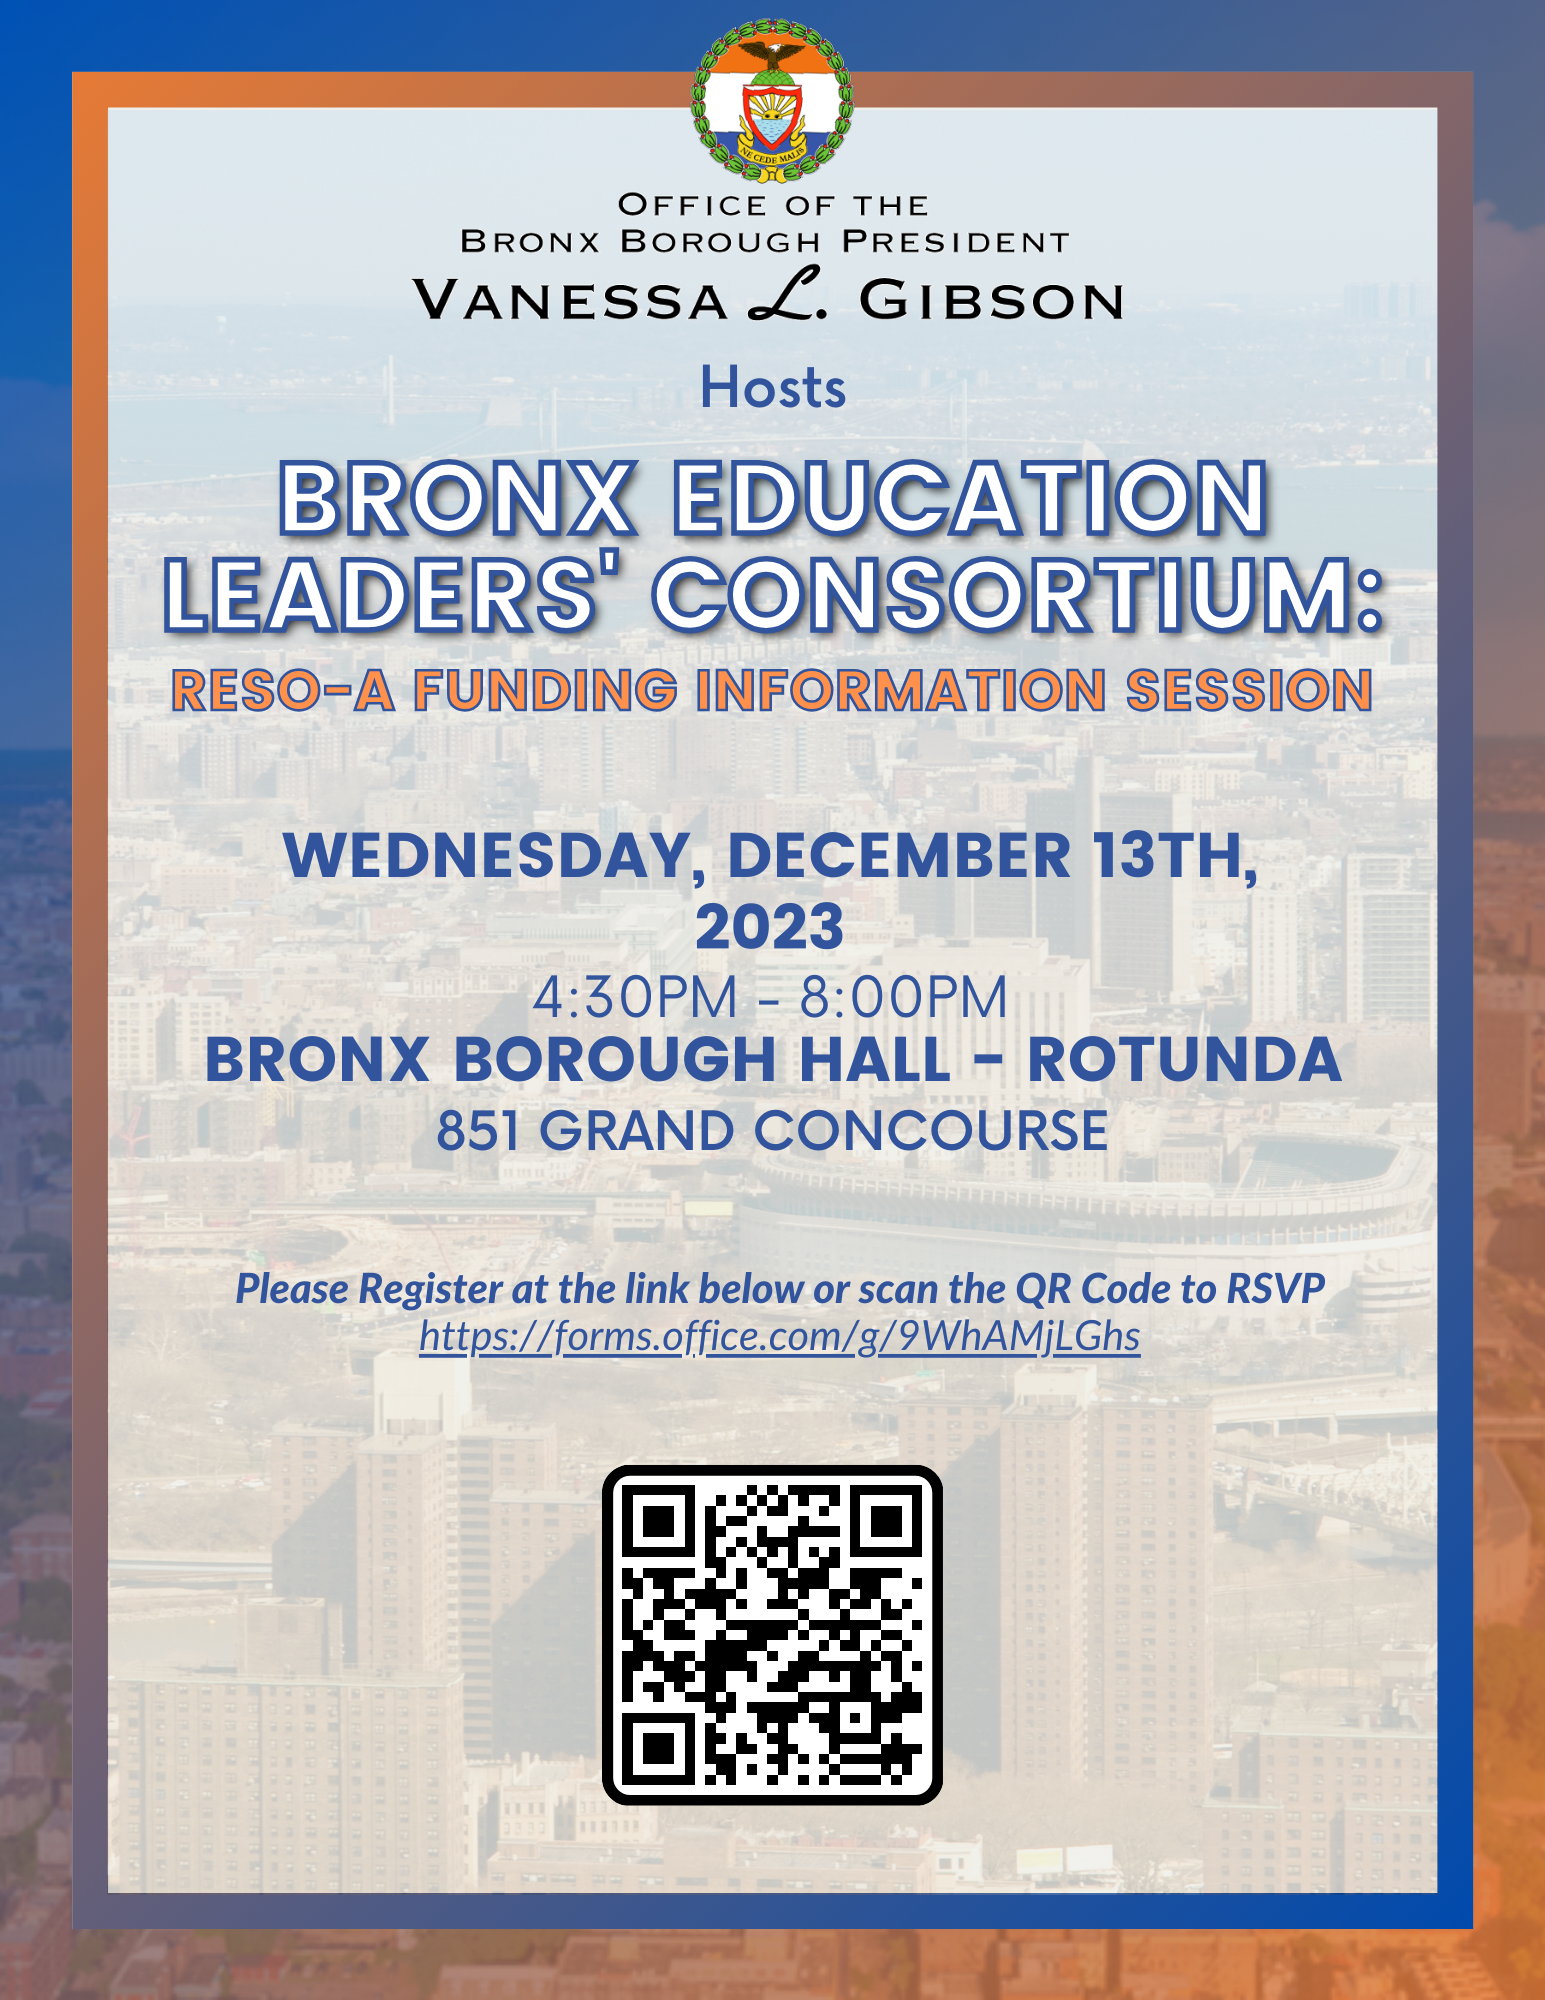 A flyer for a Reso-A Funding Information Session on December 13 at 4:30 PM EST